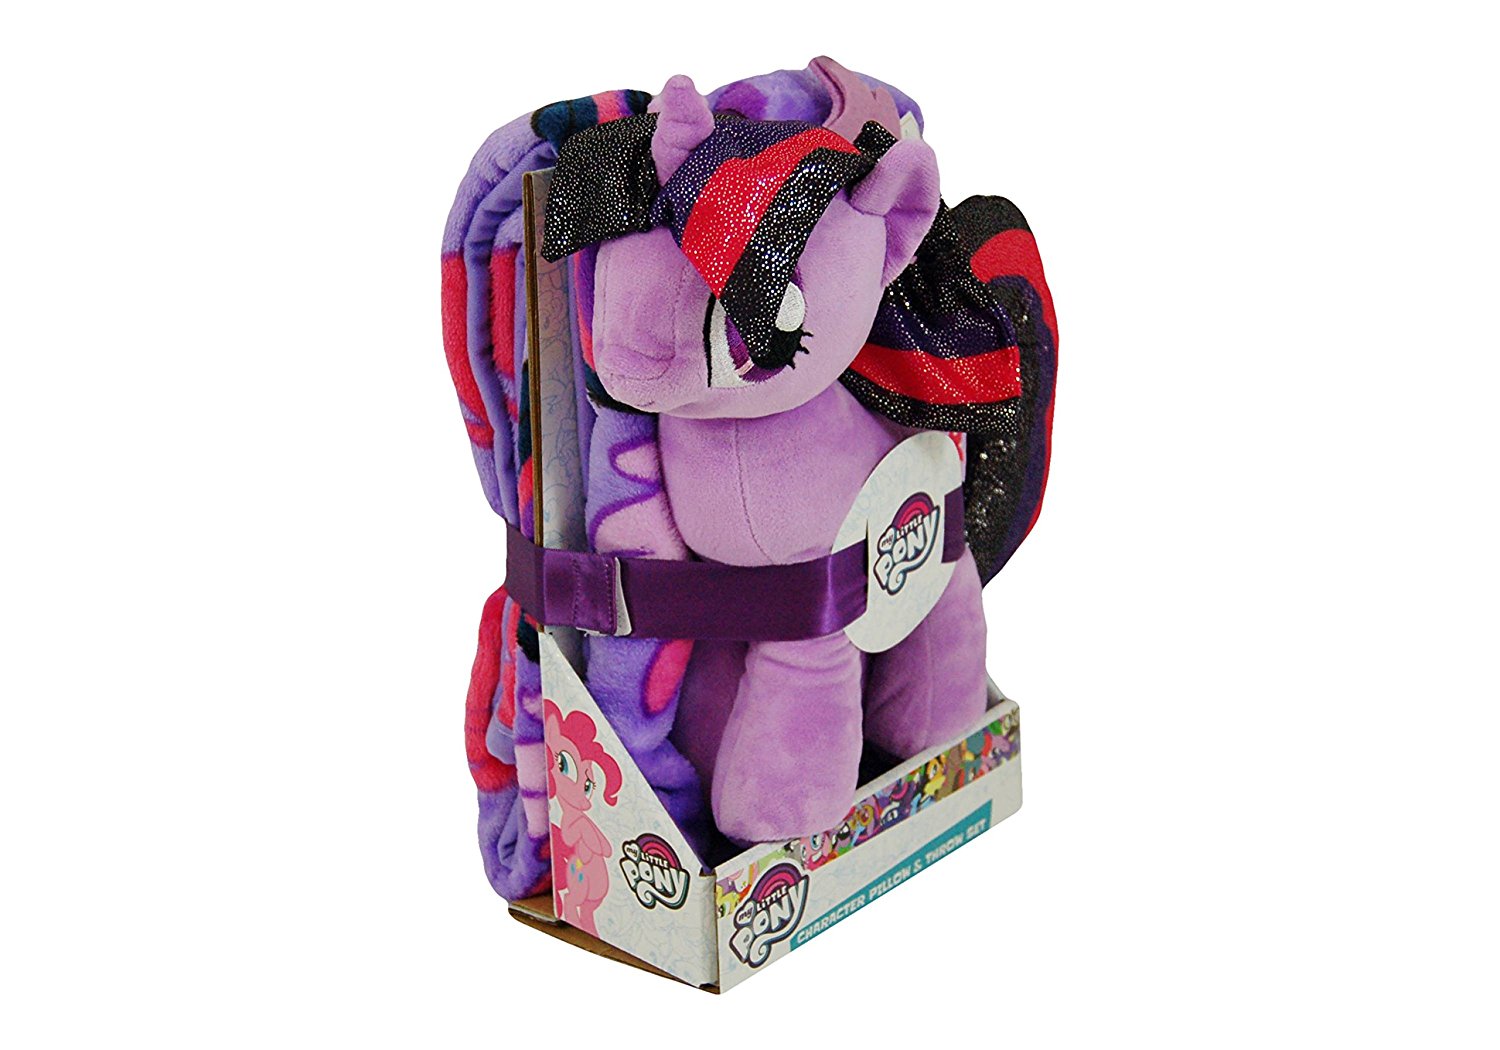 MLP: TM Character Pillow and Throw Blanket Set 1